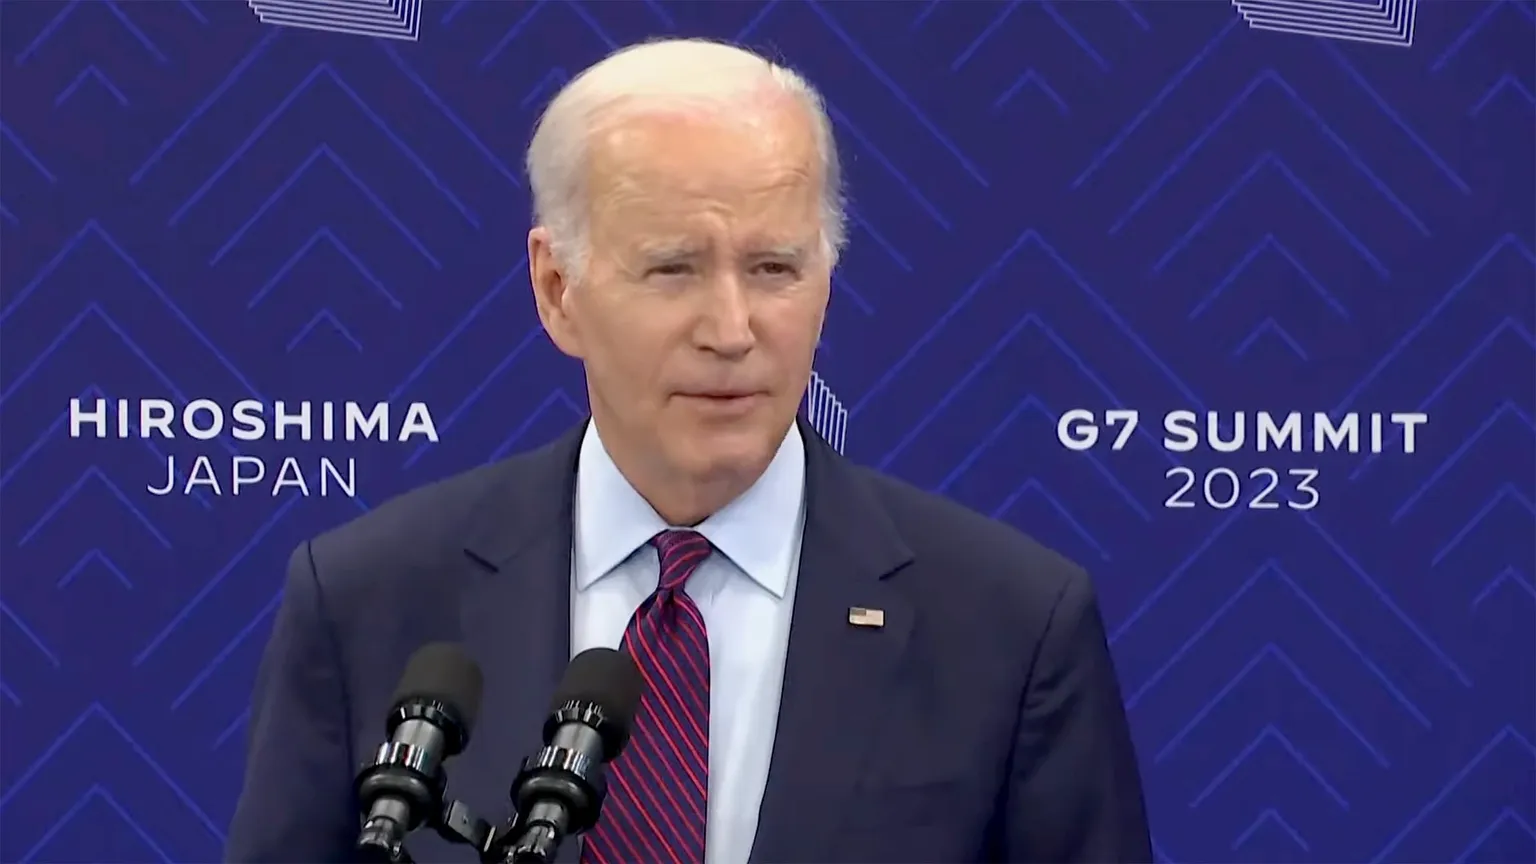 U.S. President Joe Biden at the 2023 Group of Seven (G7) conference in Japan.